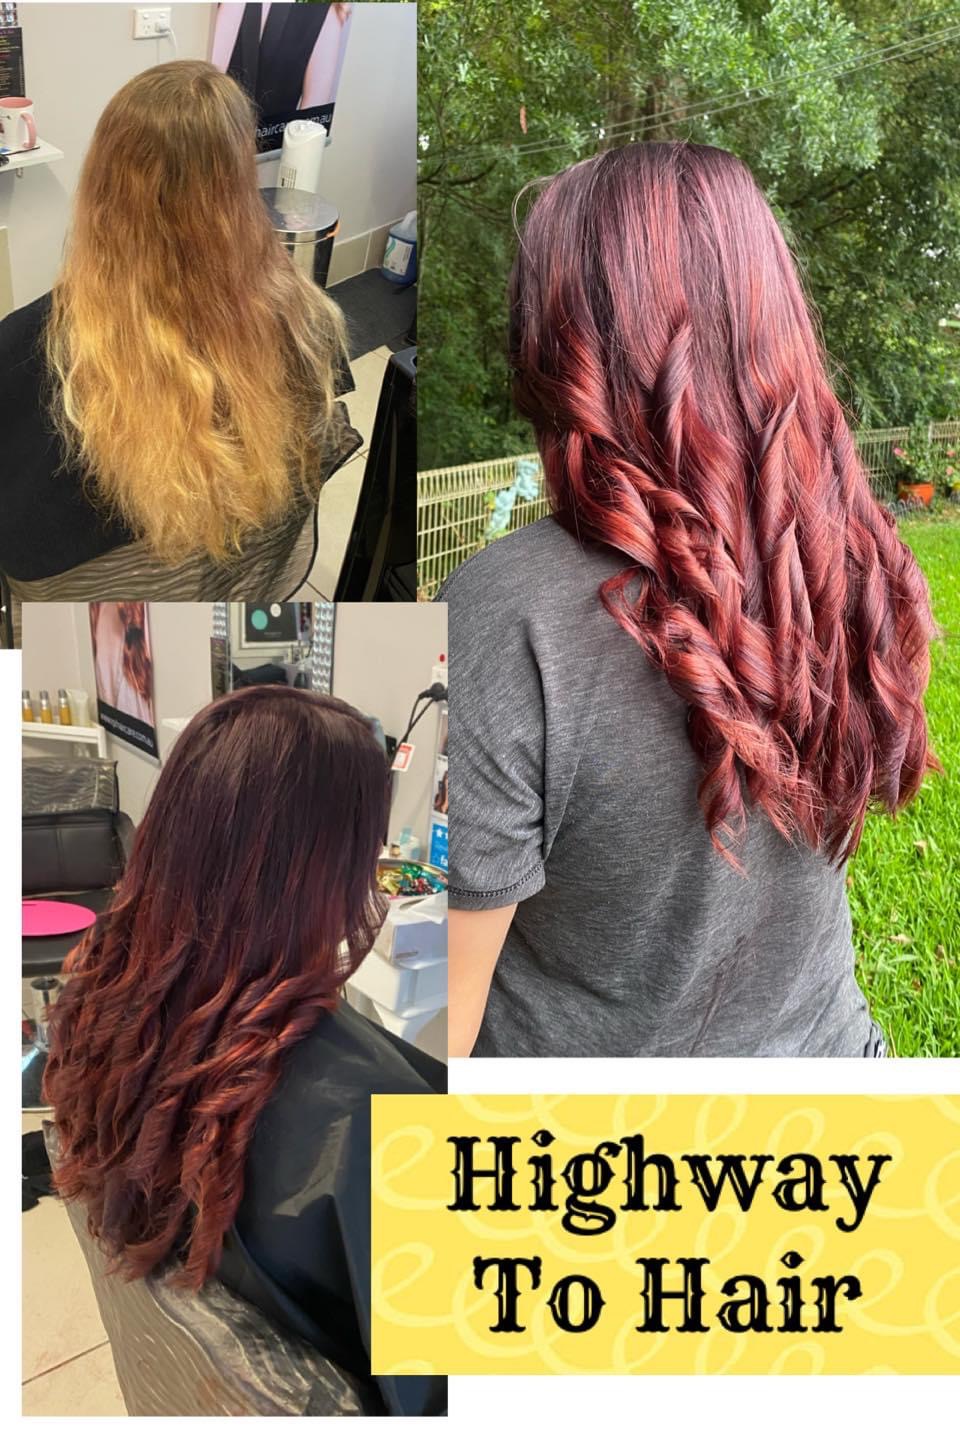 Highway To Hair | 141 Pacific Hwy, Ourimbah NSW 2258, Australia | Phone: 0404 207 730